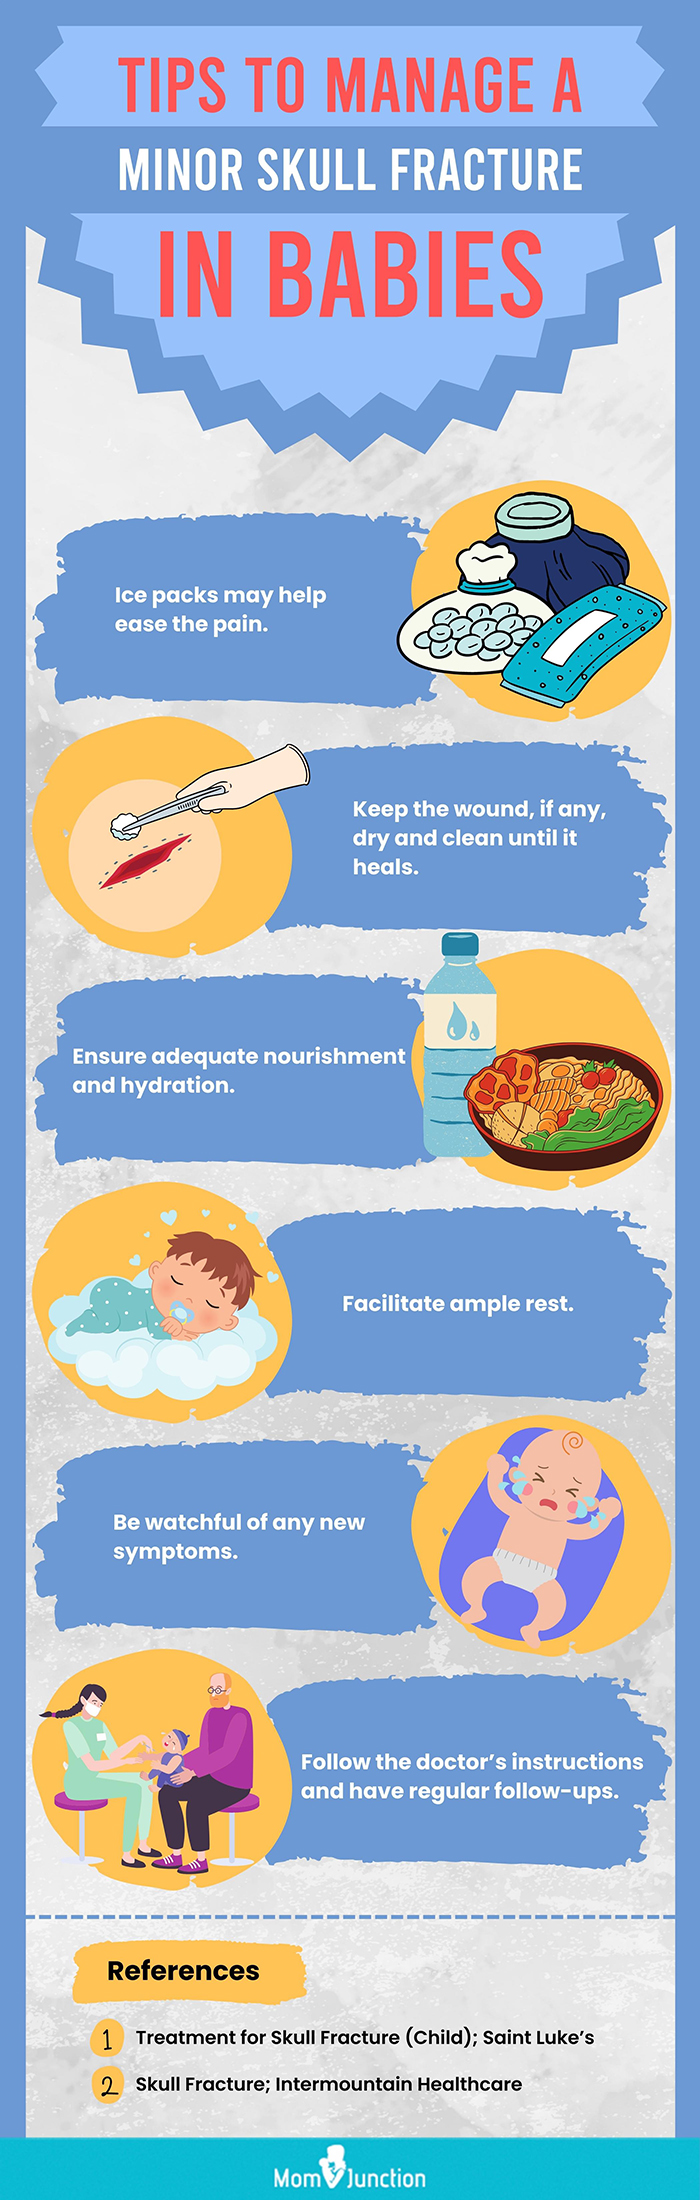 tips to manage a minor skull fracture in babies [infographic]